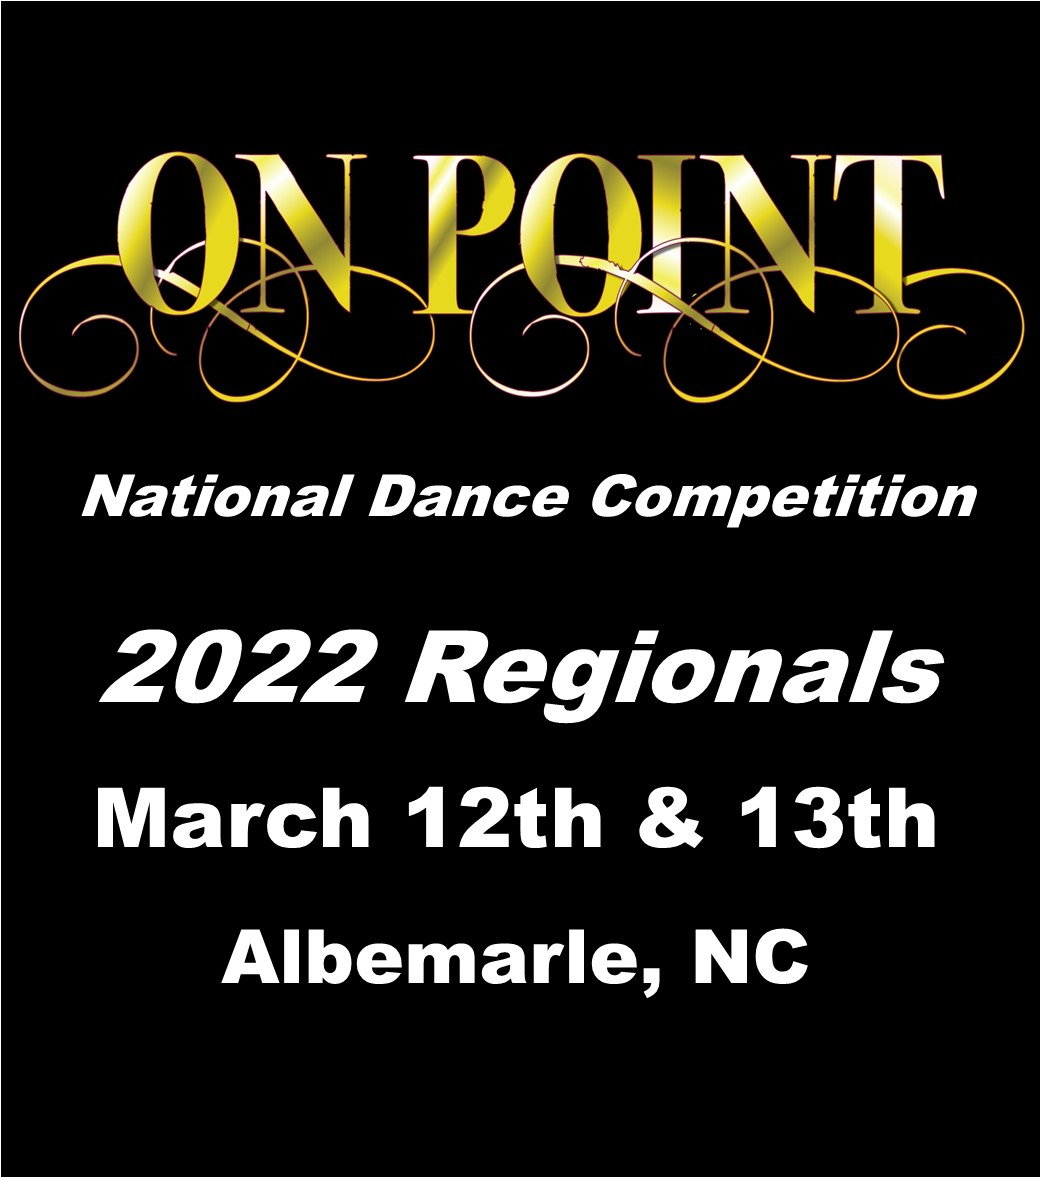 On Point National Dance Competition